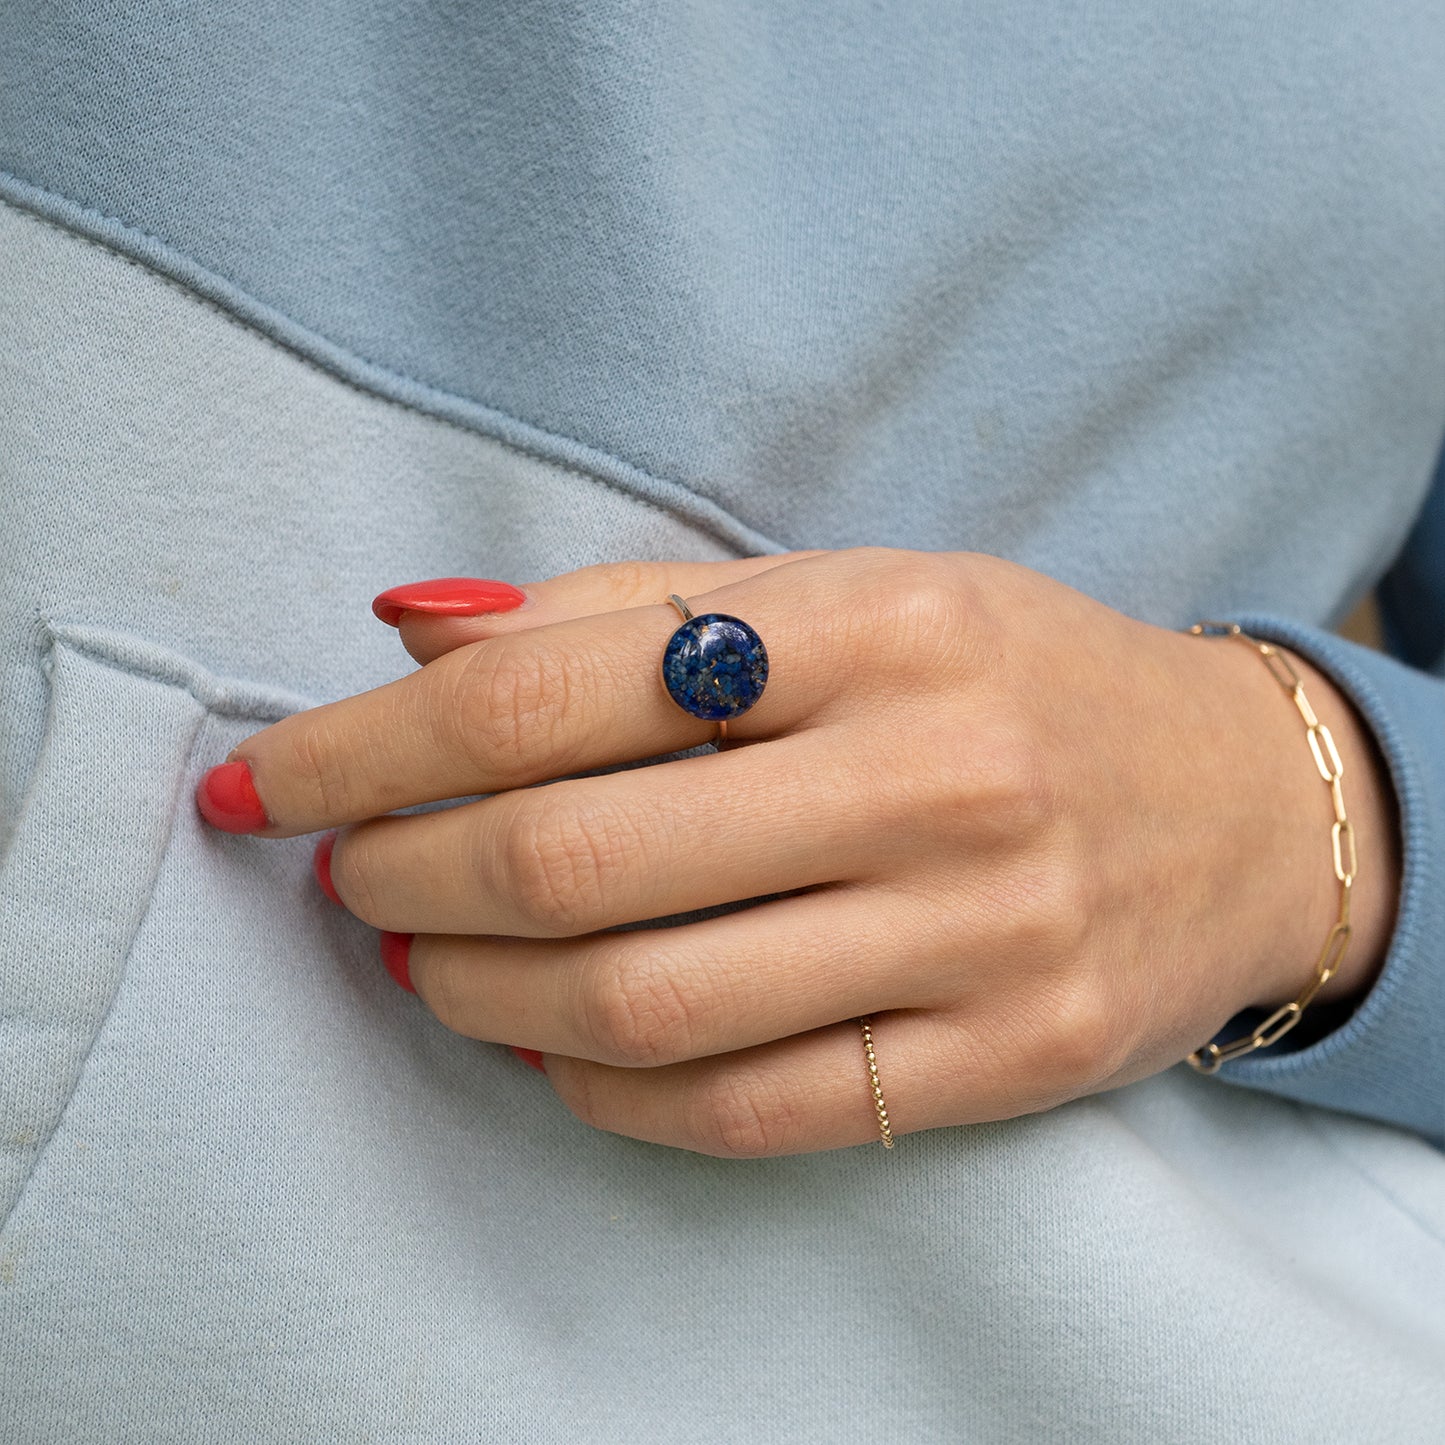 
                  
                    Deep navy blue statement adorable rings with tiny real Lapis Lazuli stone pieces captured in glass like resin in a 12mm round shape.
                  
                